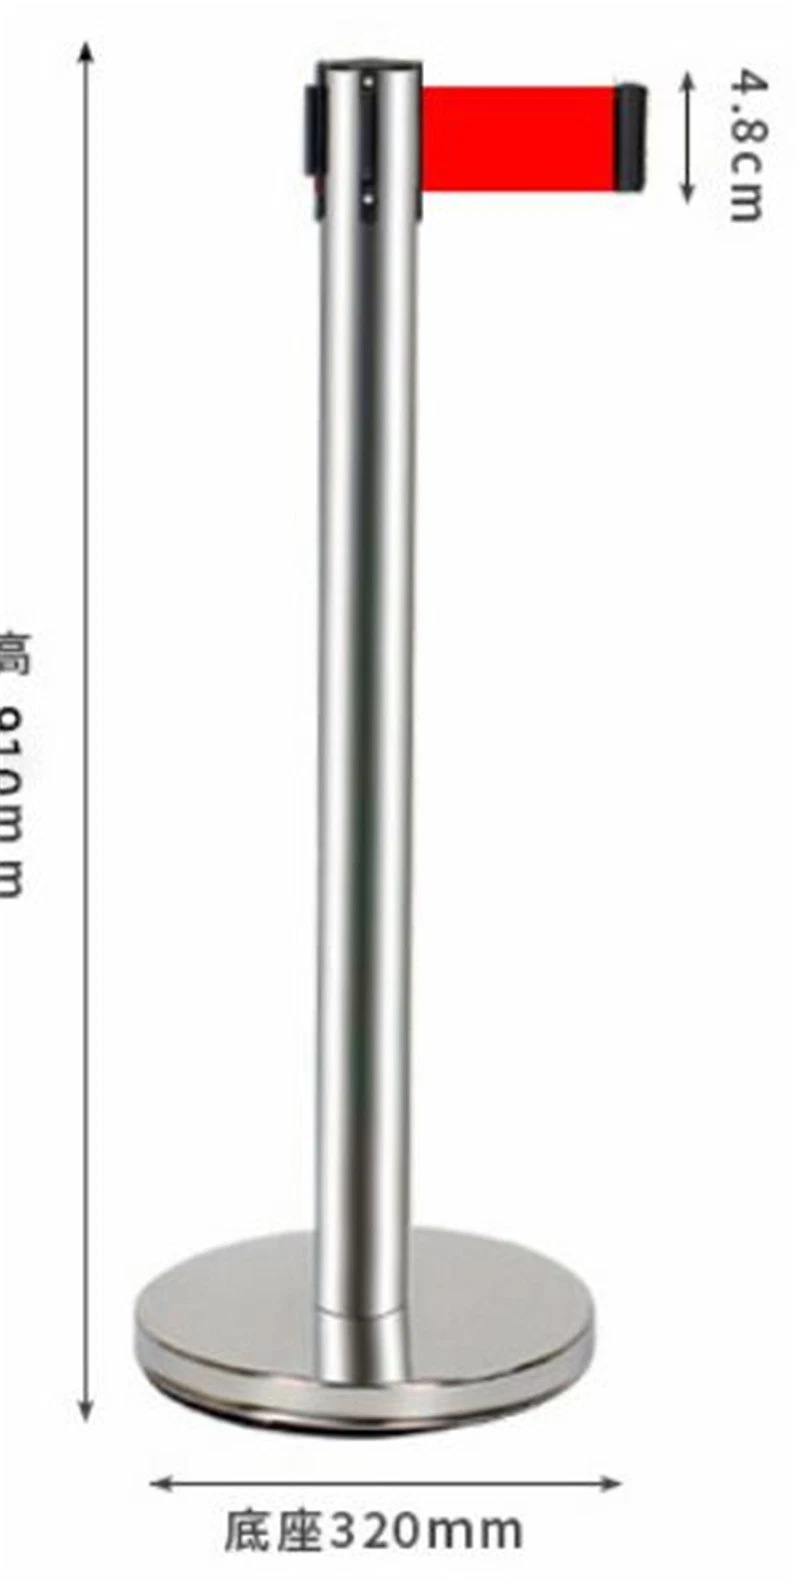 Wholesale/Supplier Roadway Products Stainless Queue Pole, Good Quality Road Safety Crowd Control Barrier